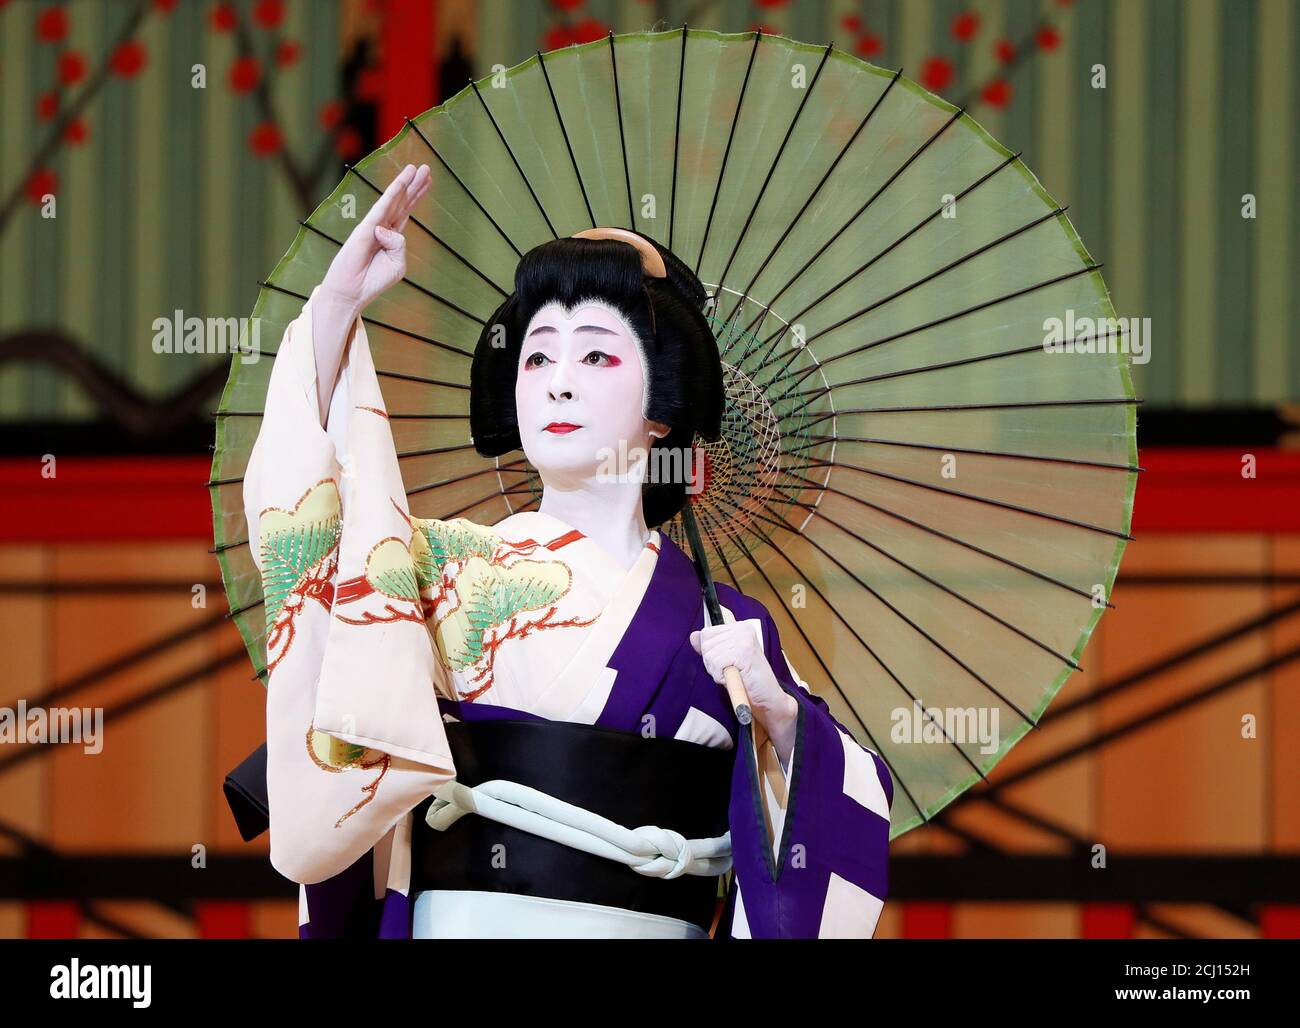 Geisha, a traditional Japanese female entertainer, performs a dance during a press preview of the annual Azuma Odori Dance Festival the Shinbashi Enbujo Theater in Tokyo, May 2018. REUTERS/Issei